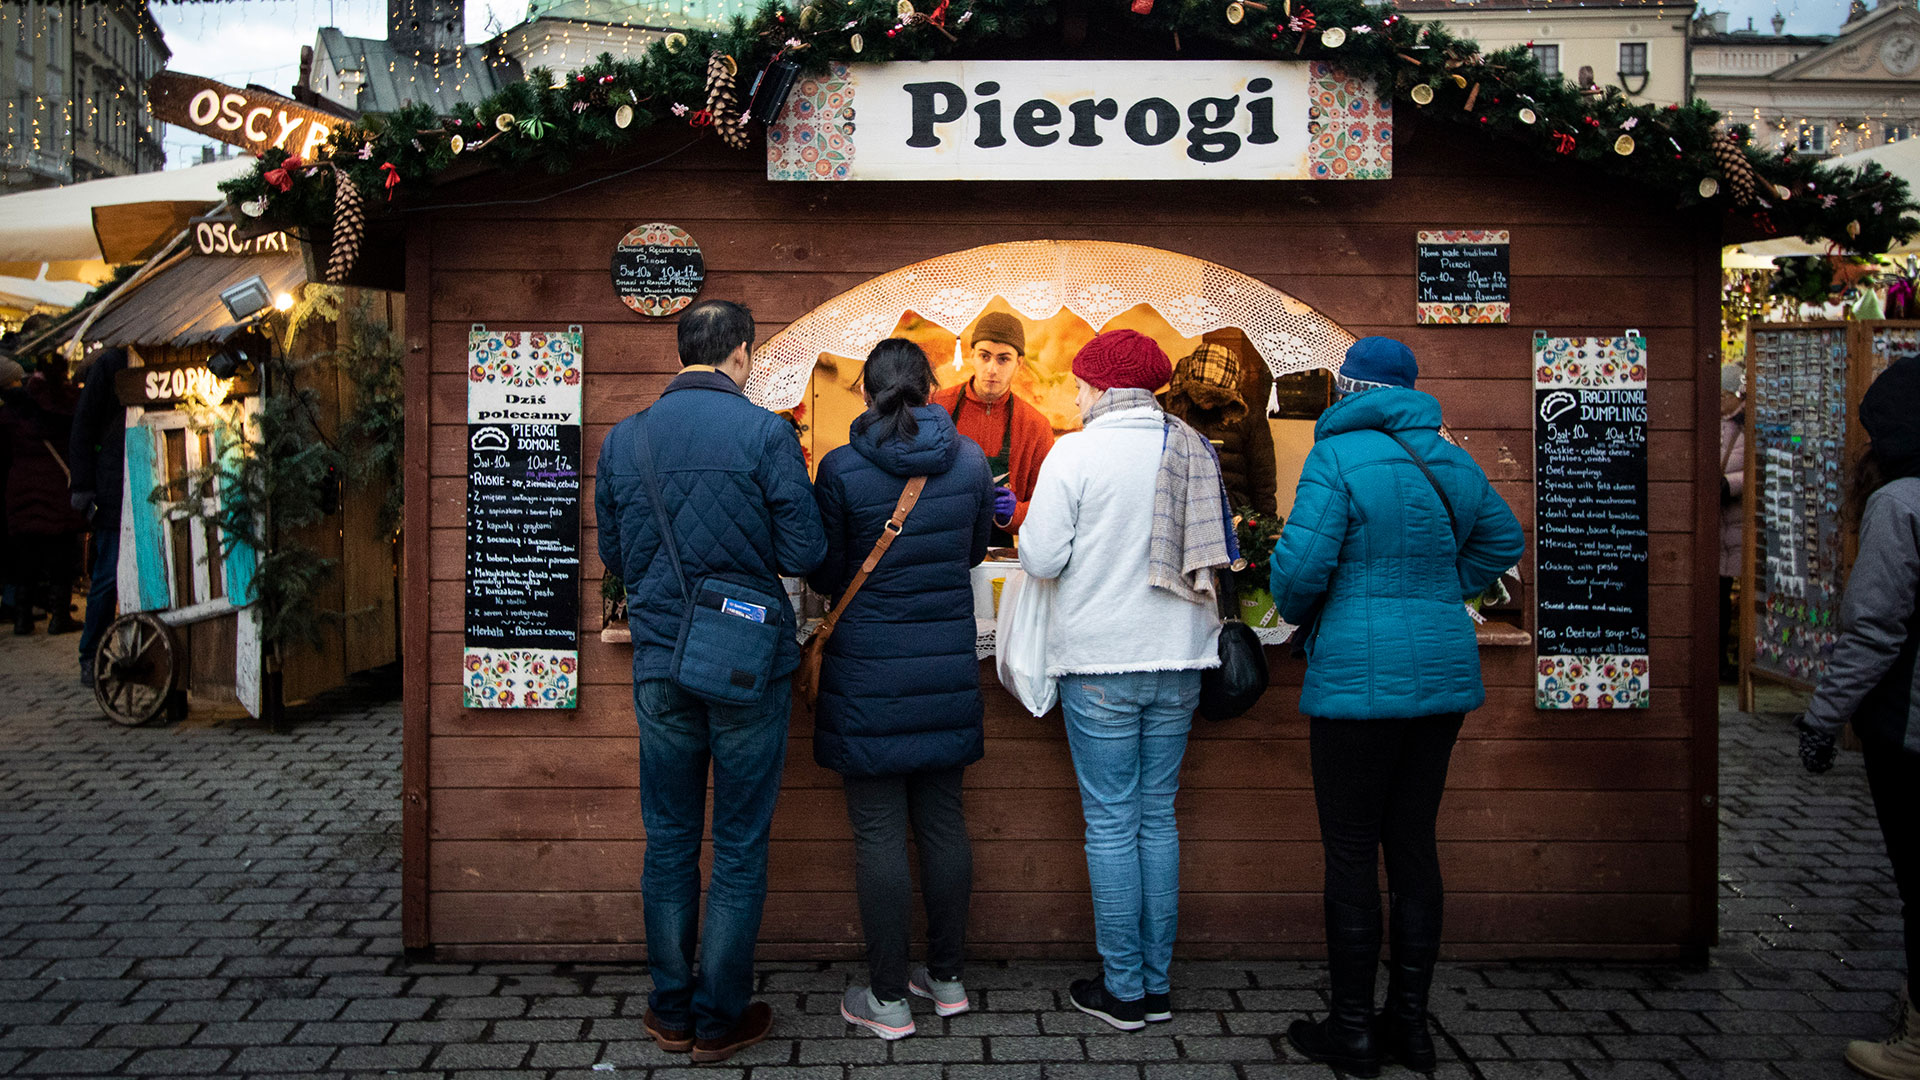 In Poland pierogi is among the favored holiday dishes. 